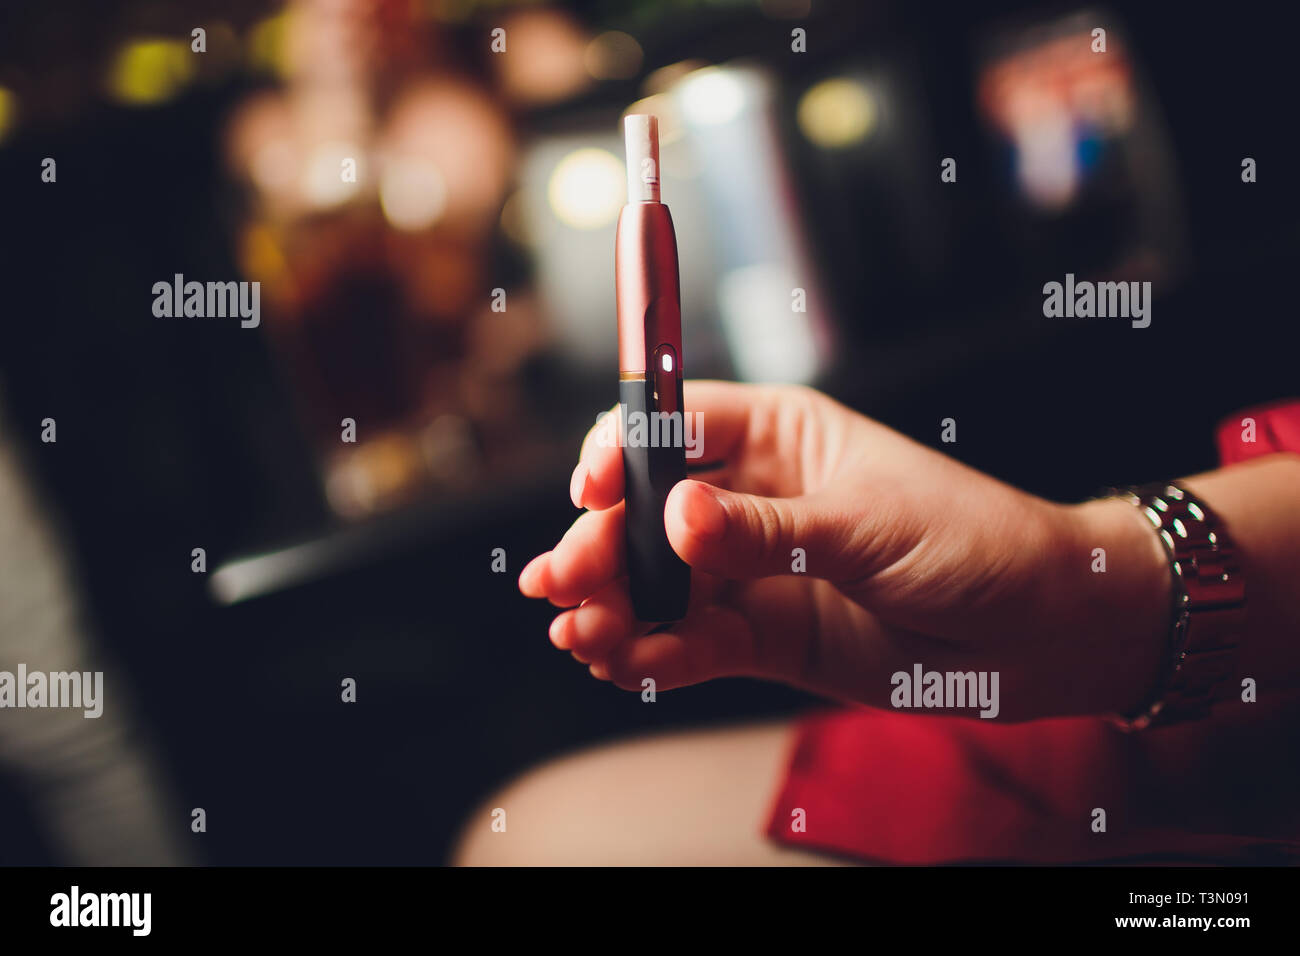 Electronic cigarettes, technology cigarette. Tobacco system IQOS Female hand on blurred background of the restaurant. red case. Stock Photo